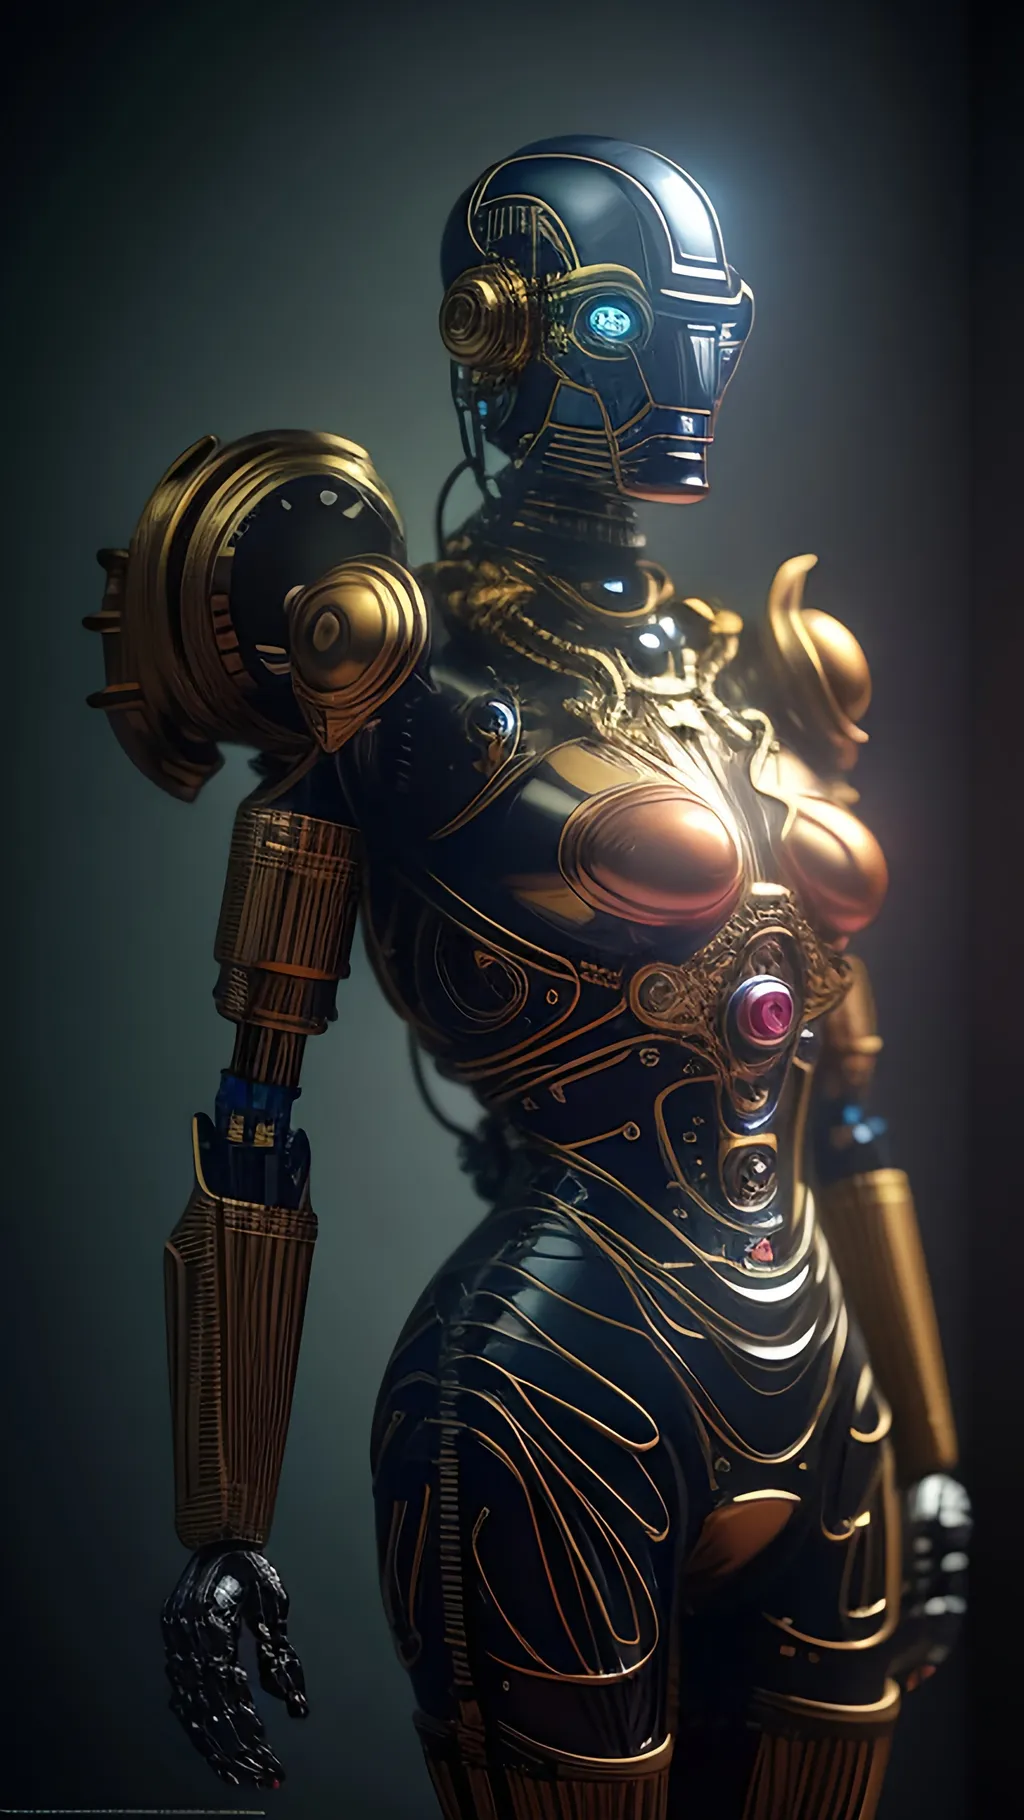 Premium AI Image  A bronze figure with a blue and gold body paint